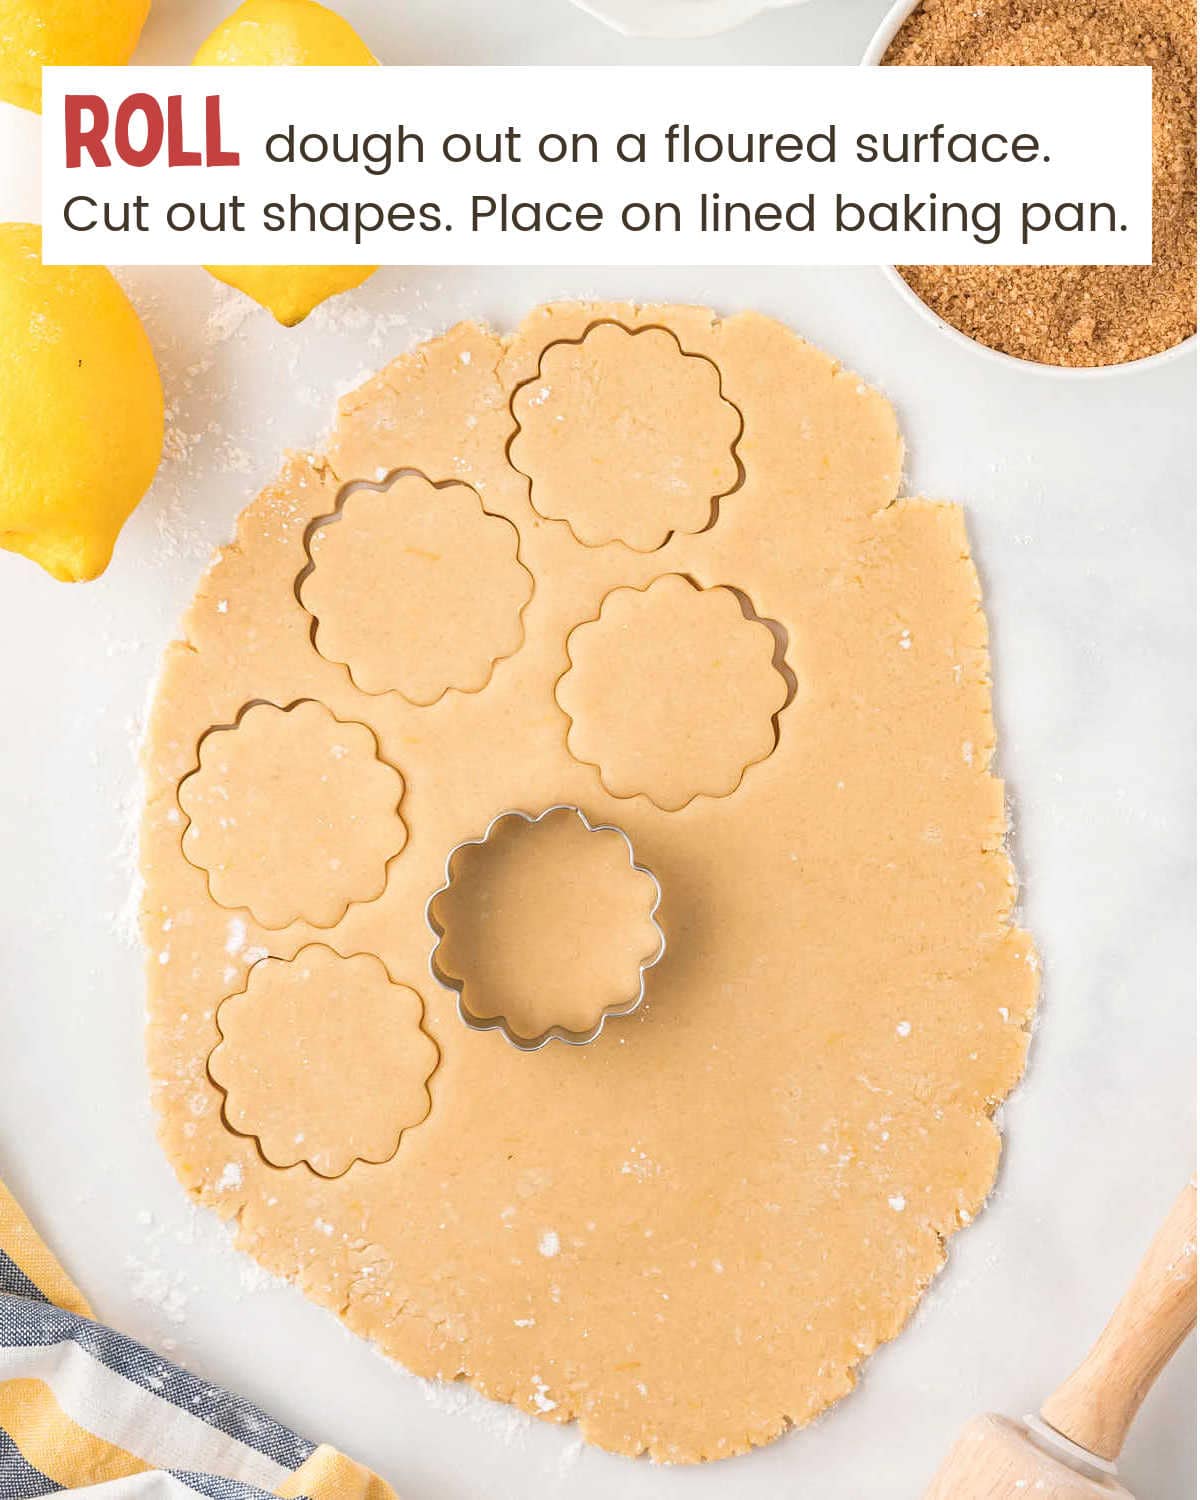 Shaping Lemon Shortbread Cookies with a cookie cutter.